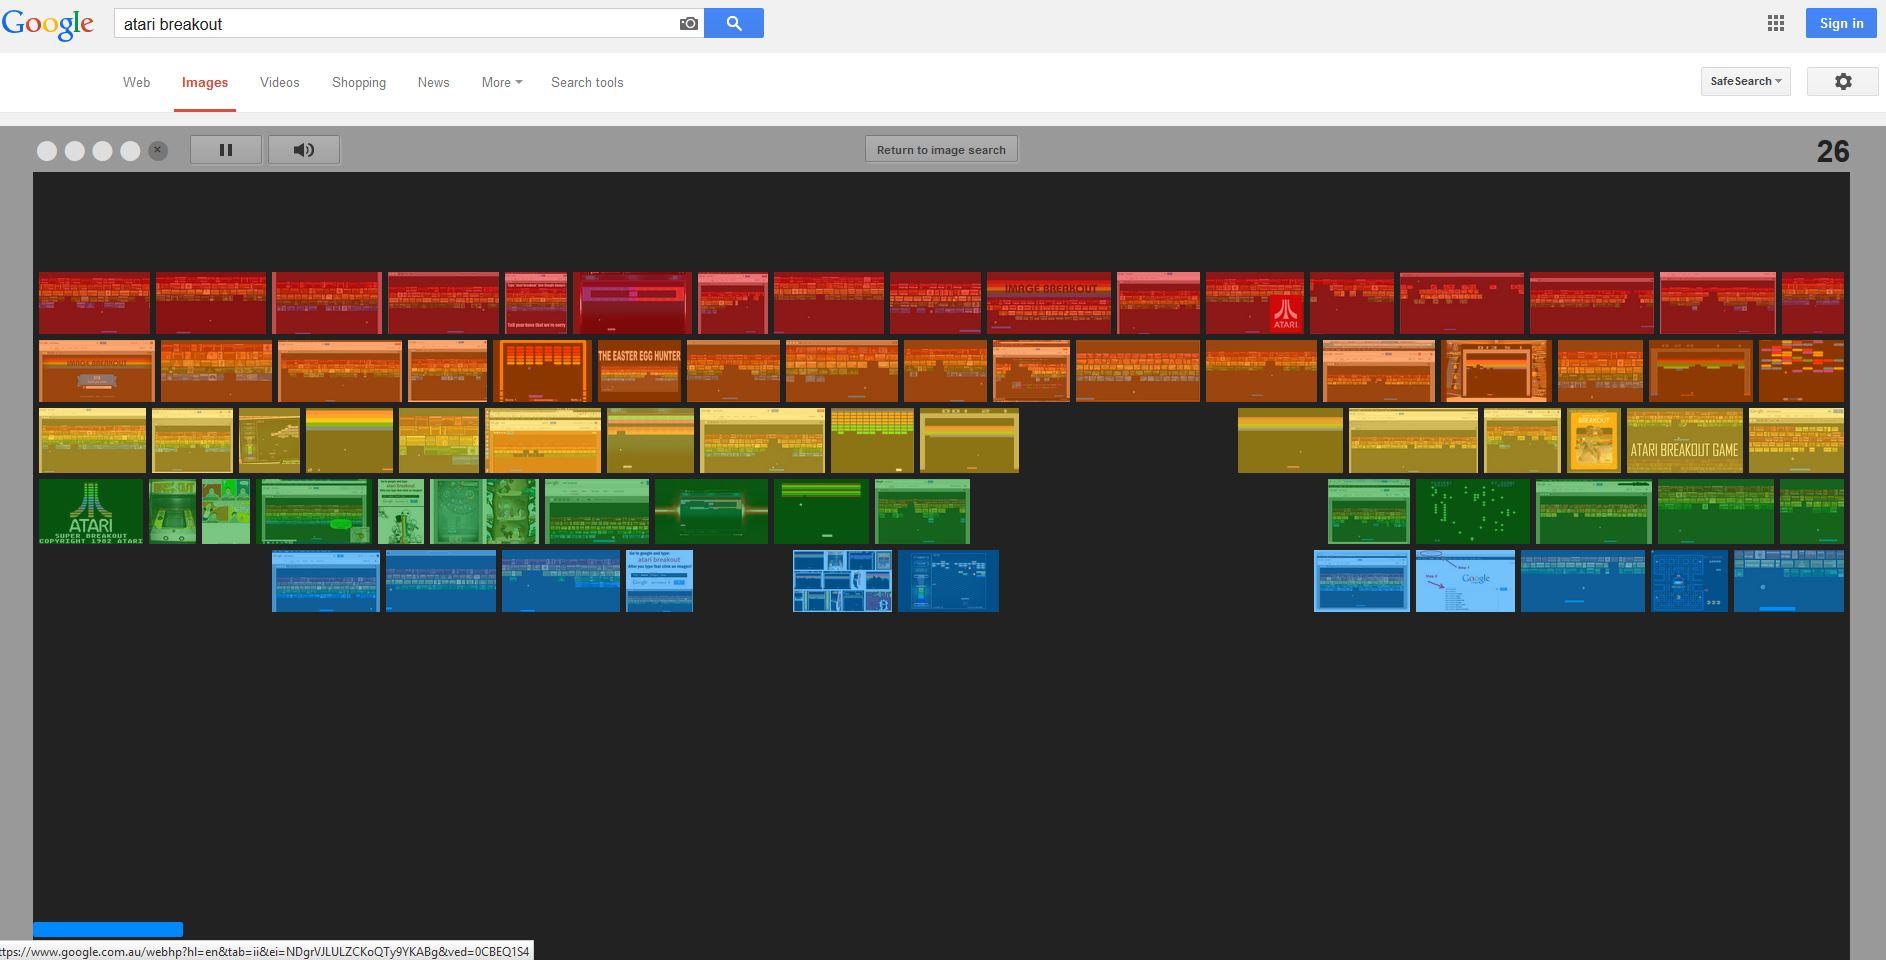 10 of the coolest Google Easter eggs